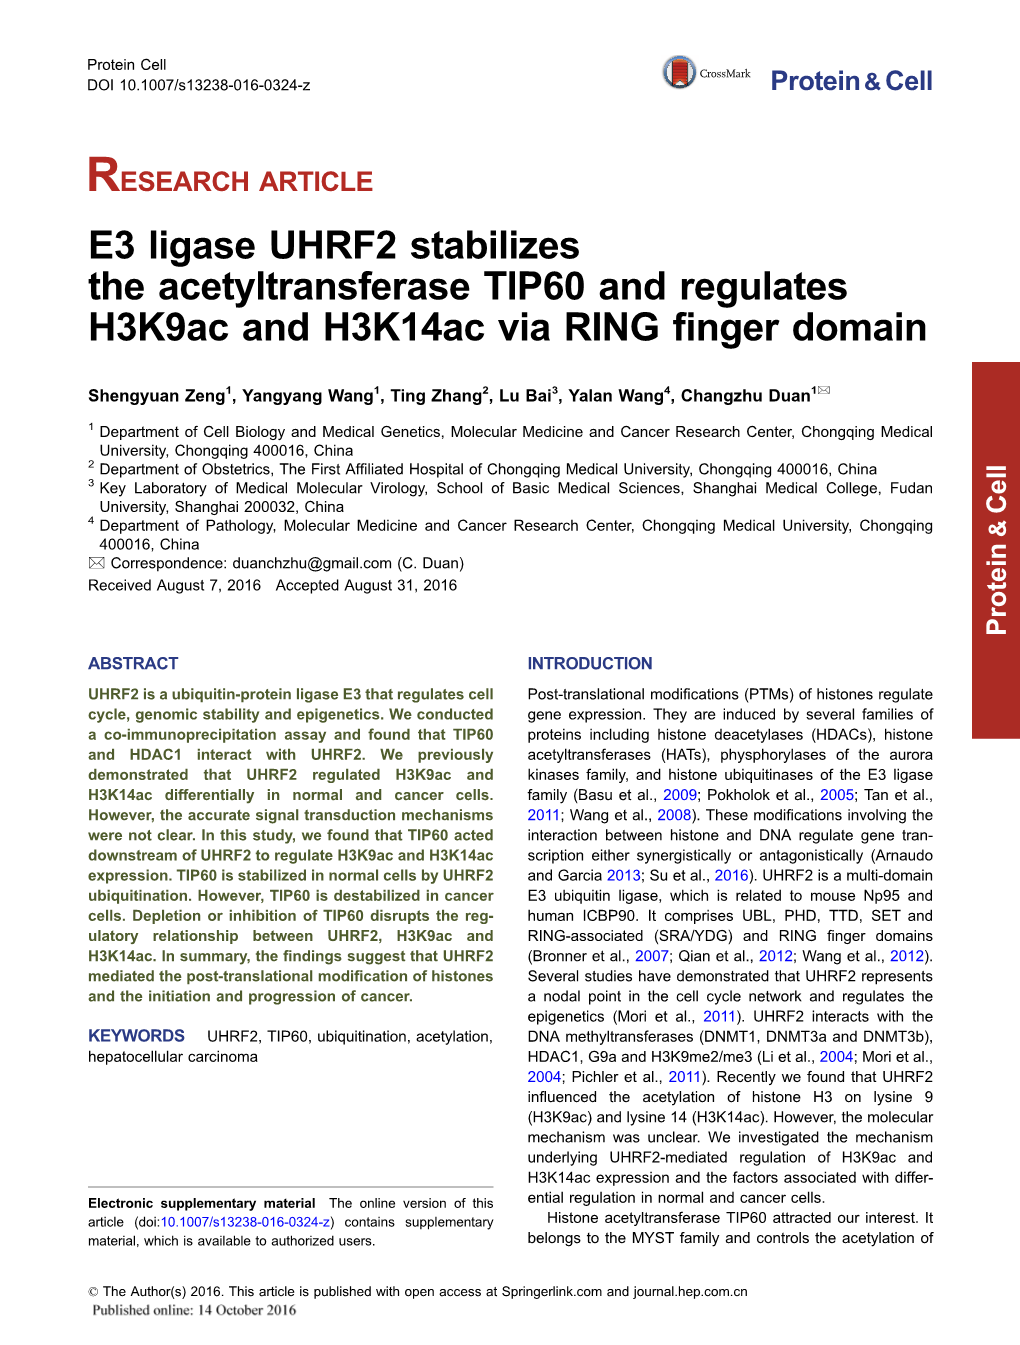 E3 Ligase UHRF2 Stabilizes the Acetyltransferase TIP60 and Regulates H3k9ac and H3k14ac Via RING ﬁnger Domain